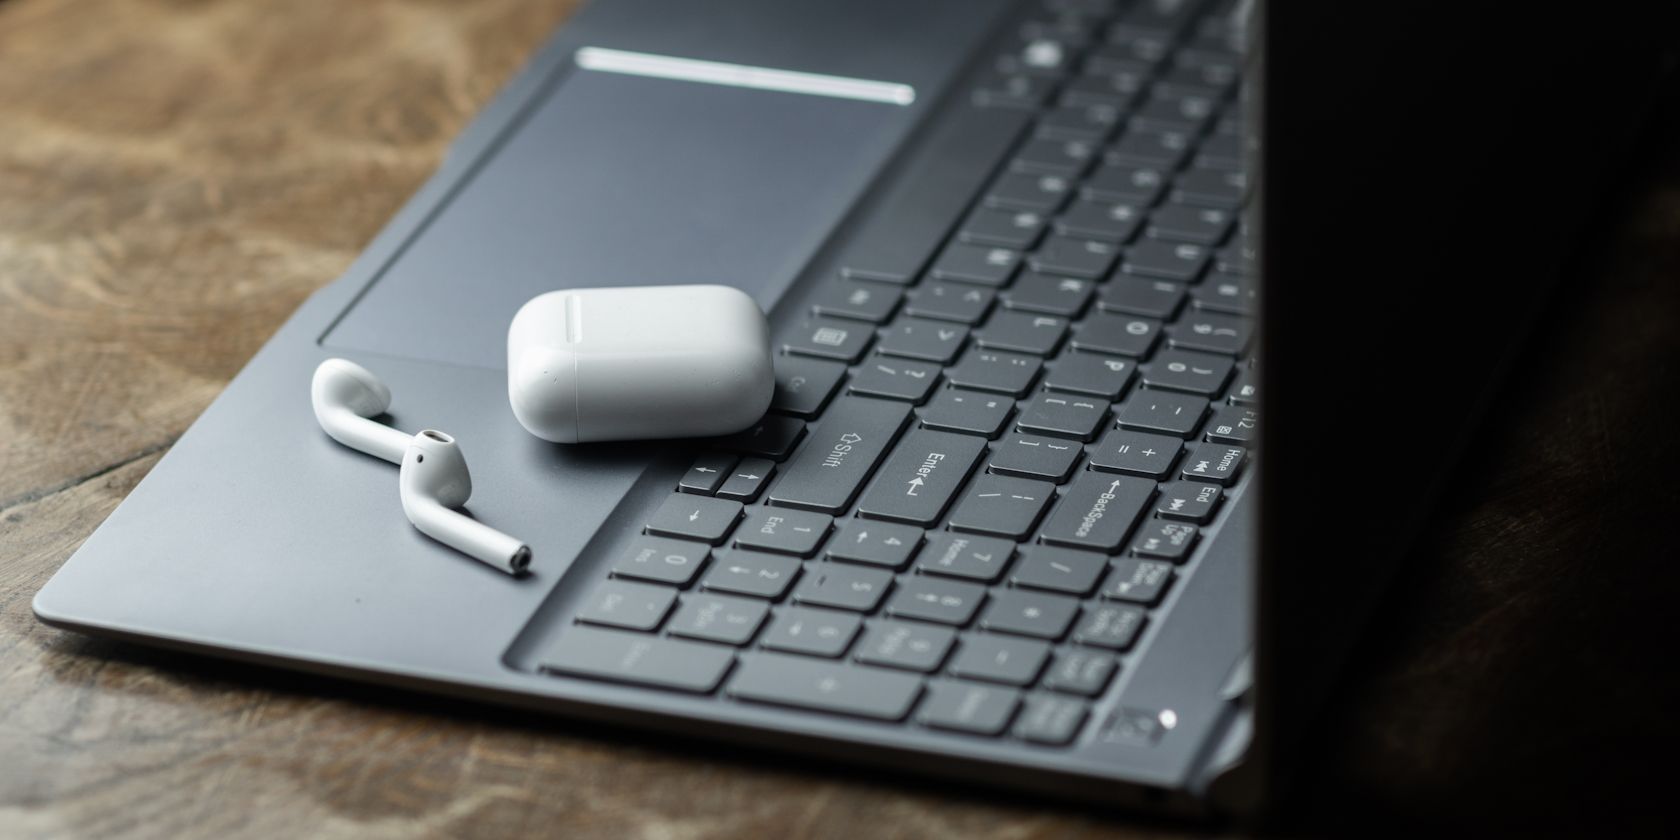 AirPods with case on top of a Windows laptop